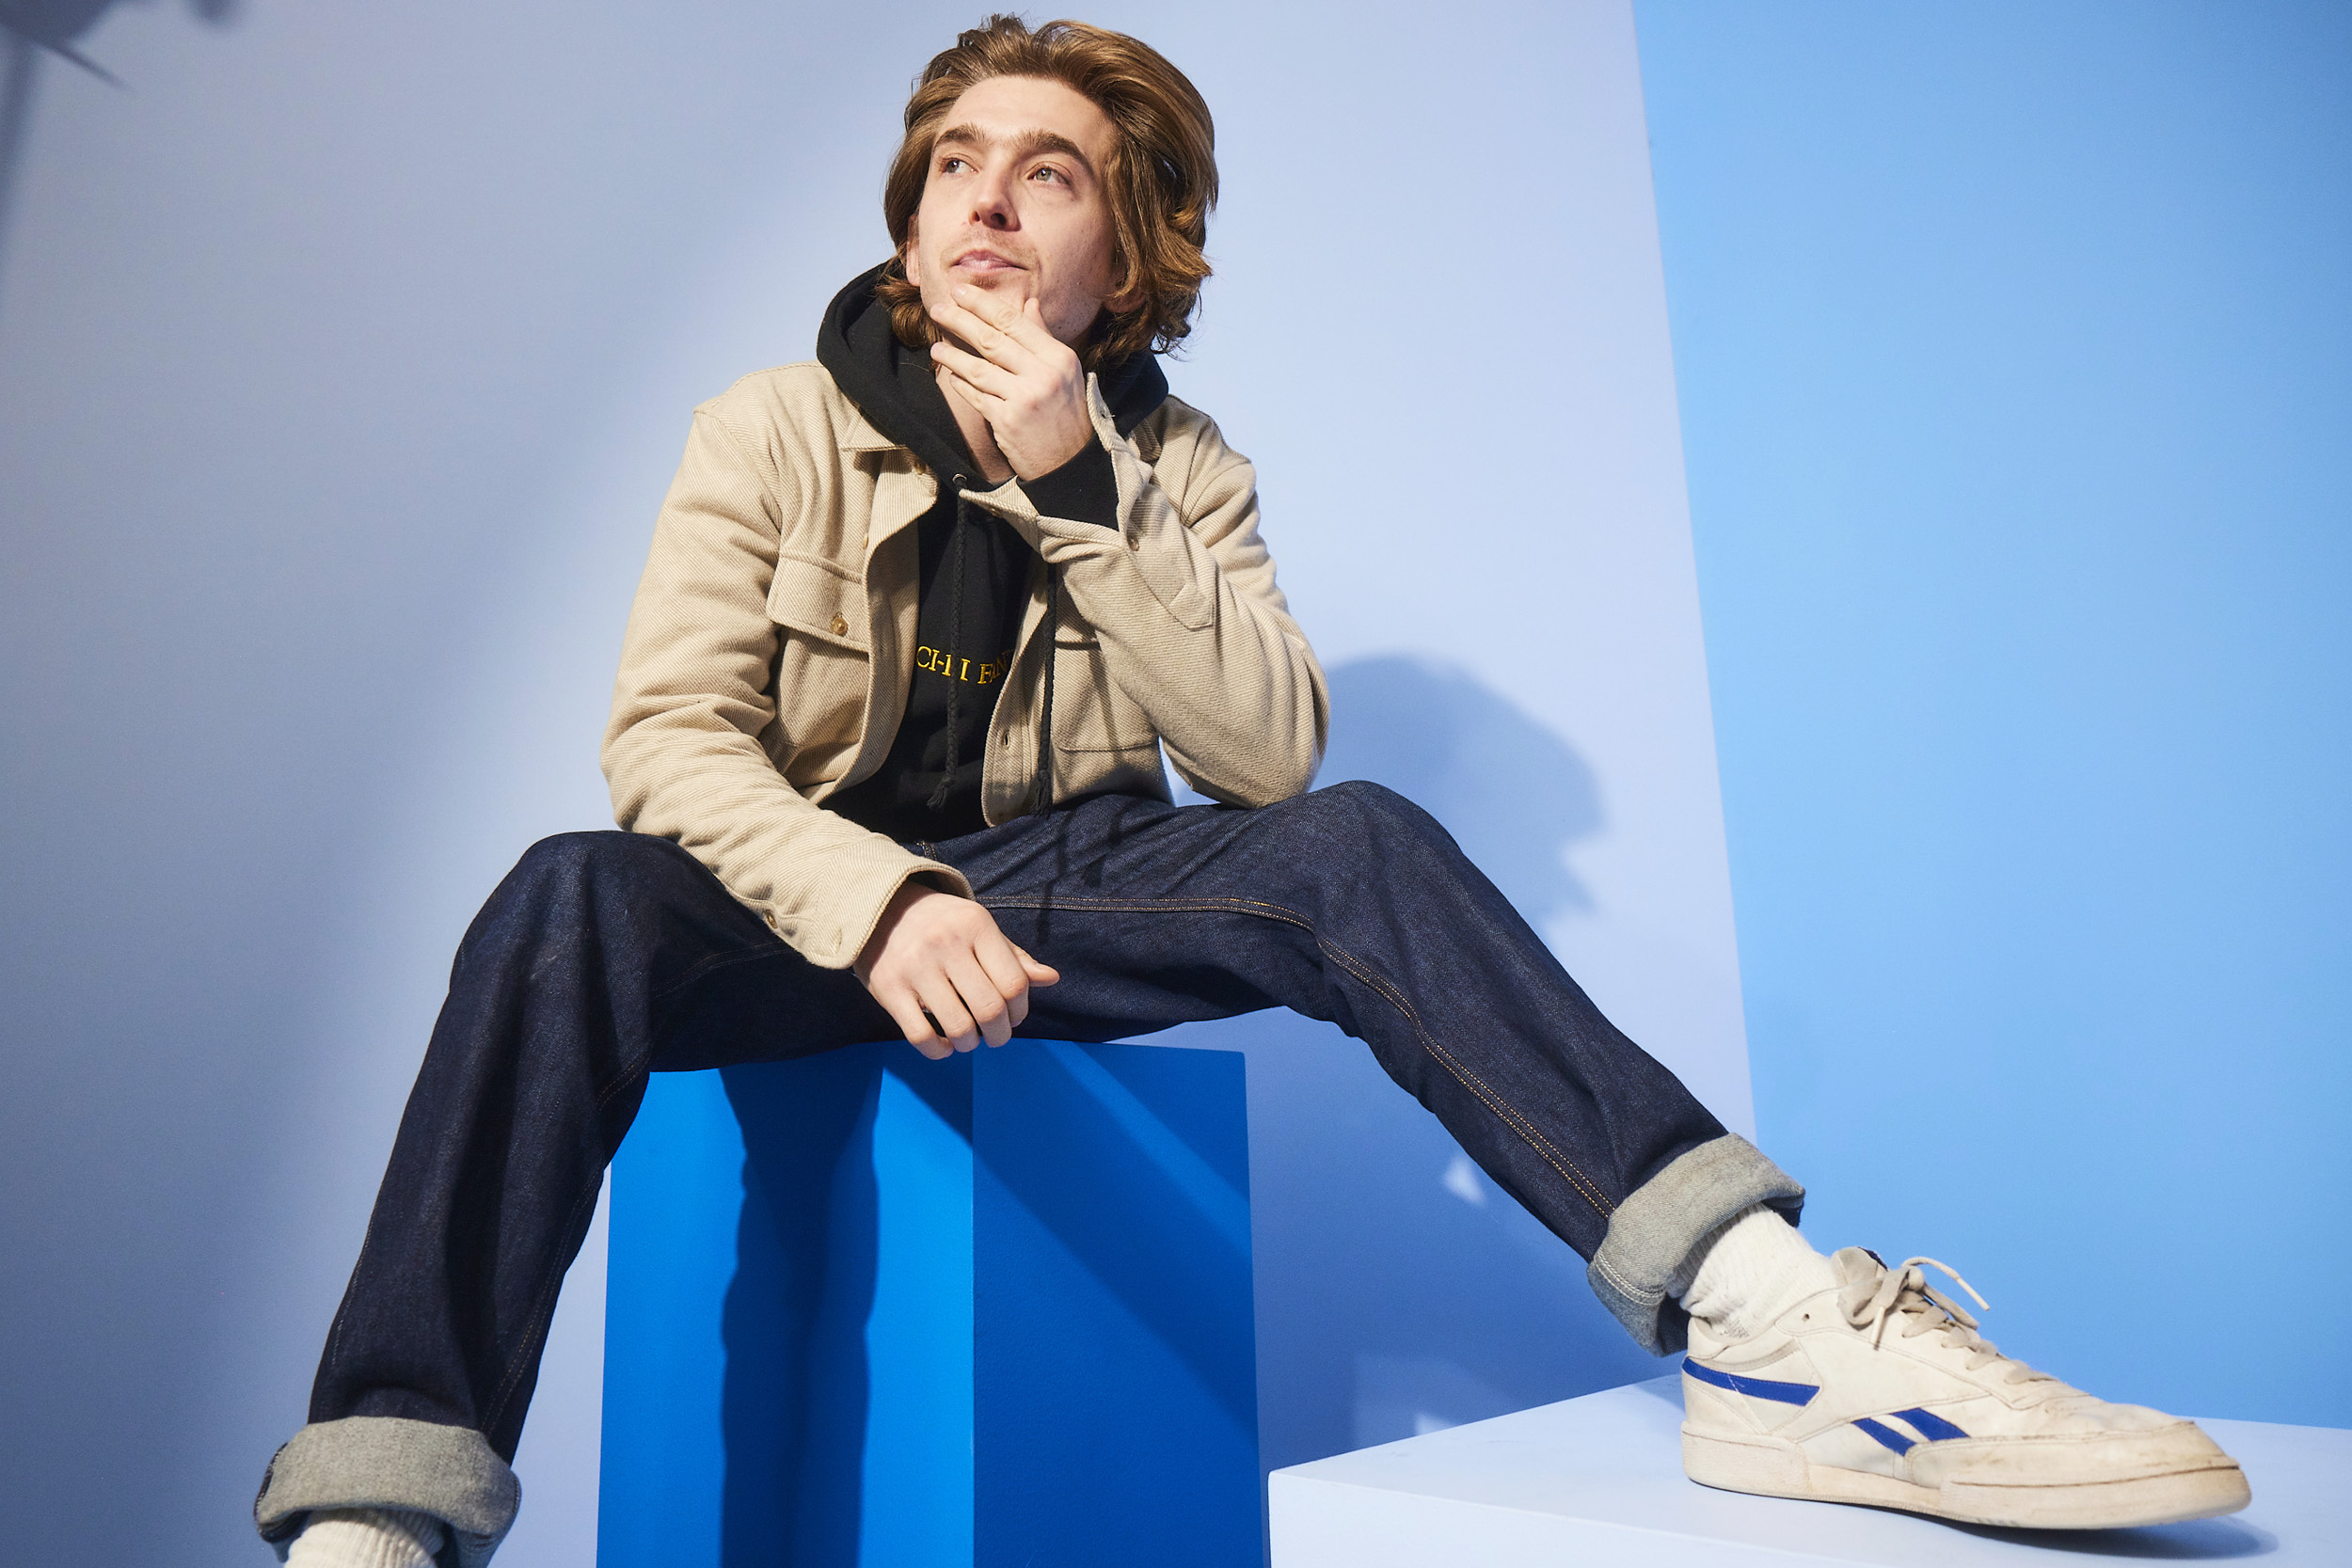 Austin Abrams at The IMDb Portrait Studio on January 22, 2023, in Utah. | Source: Getty Images